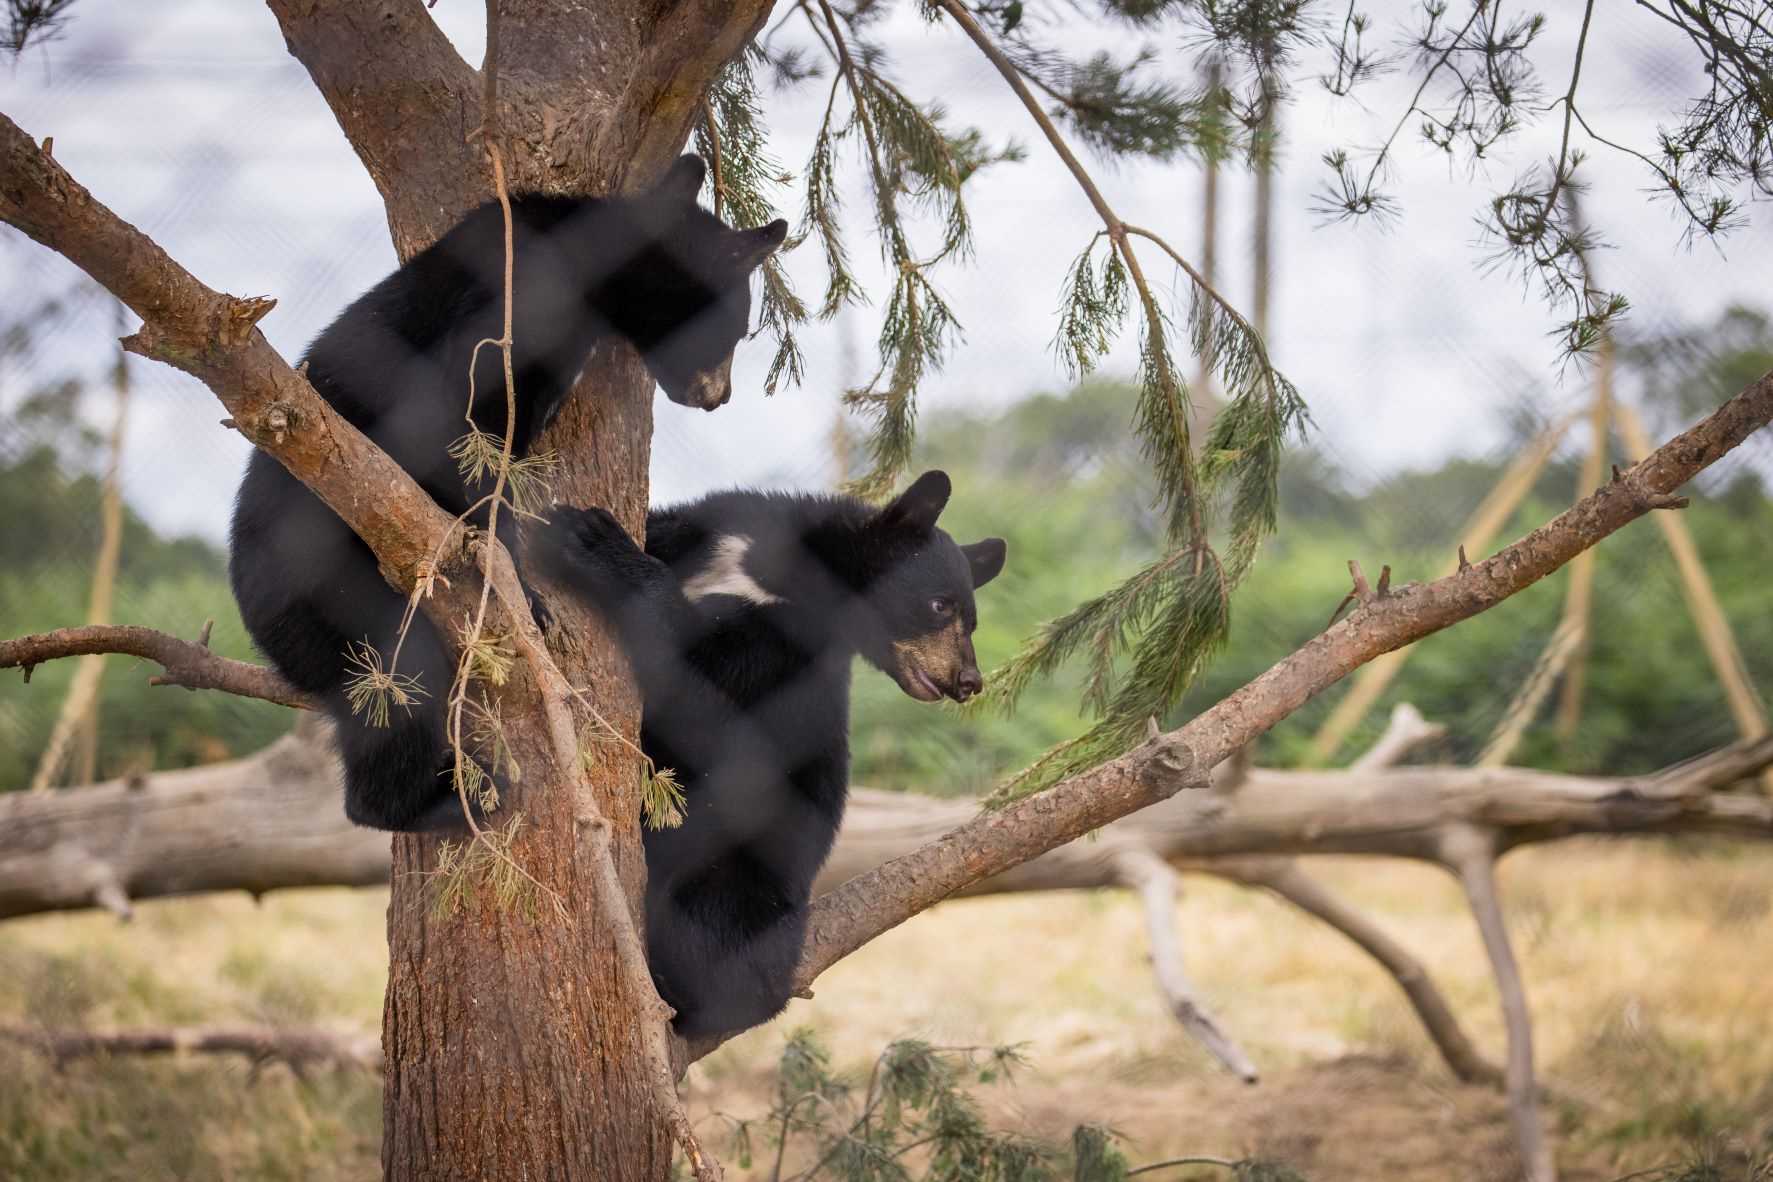 Woburn's black bear cubs take first steps out of den - BBC News